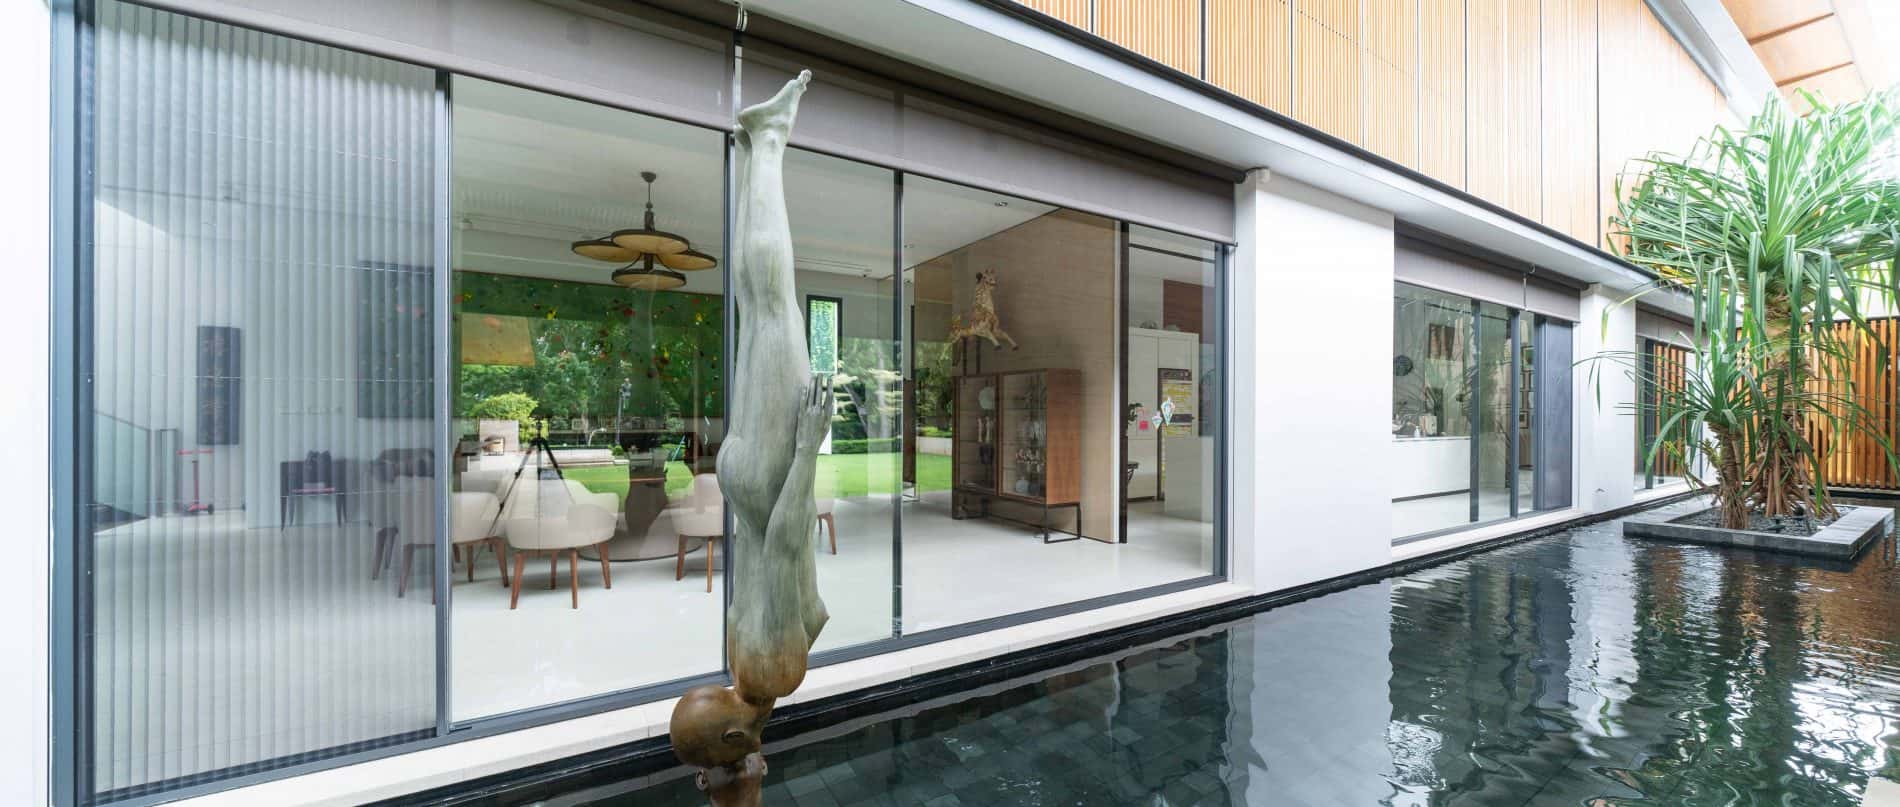 SKY-FRAME Sliding doors with inbuilt SKY-FRAME FLY insect screen at 46 Nassim Road by  Ernesto Bedmar Architects Pte Ltd